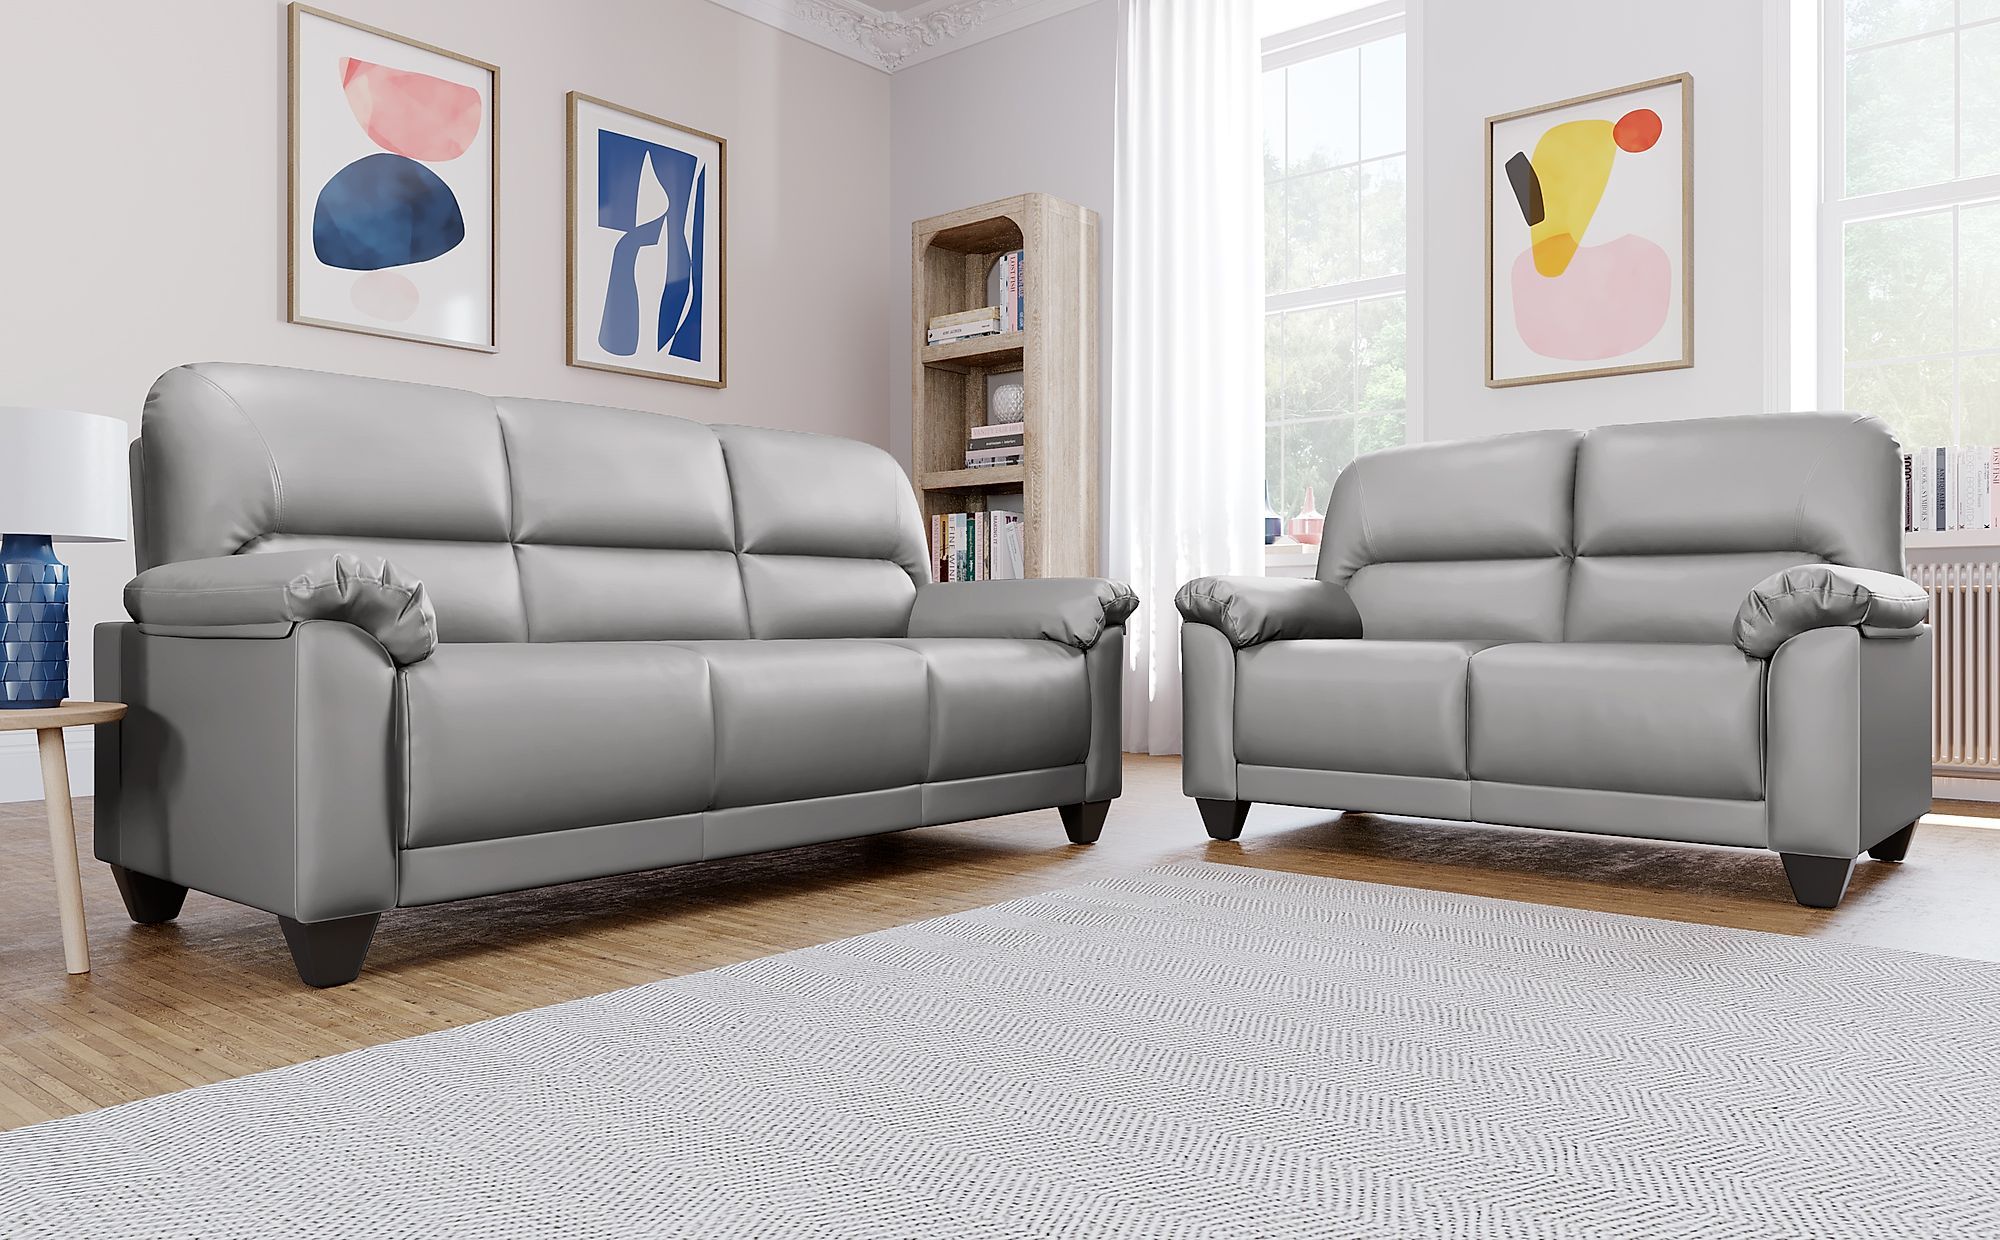 Kenton Small Light Grey Leather 3+2 Seater Sofa Set | Furniture Choice Intended For Sofas In Light Grey (Gallery 19 of 20)